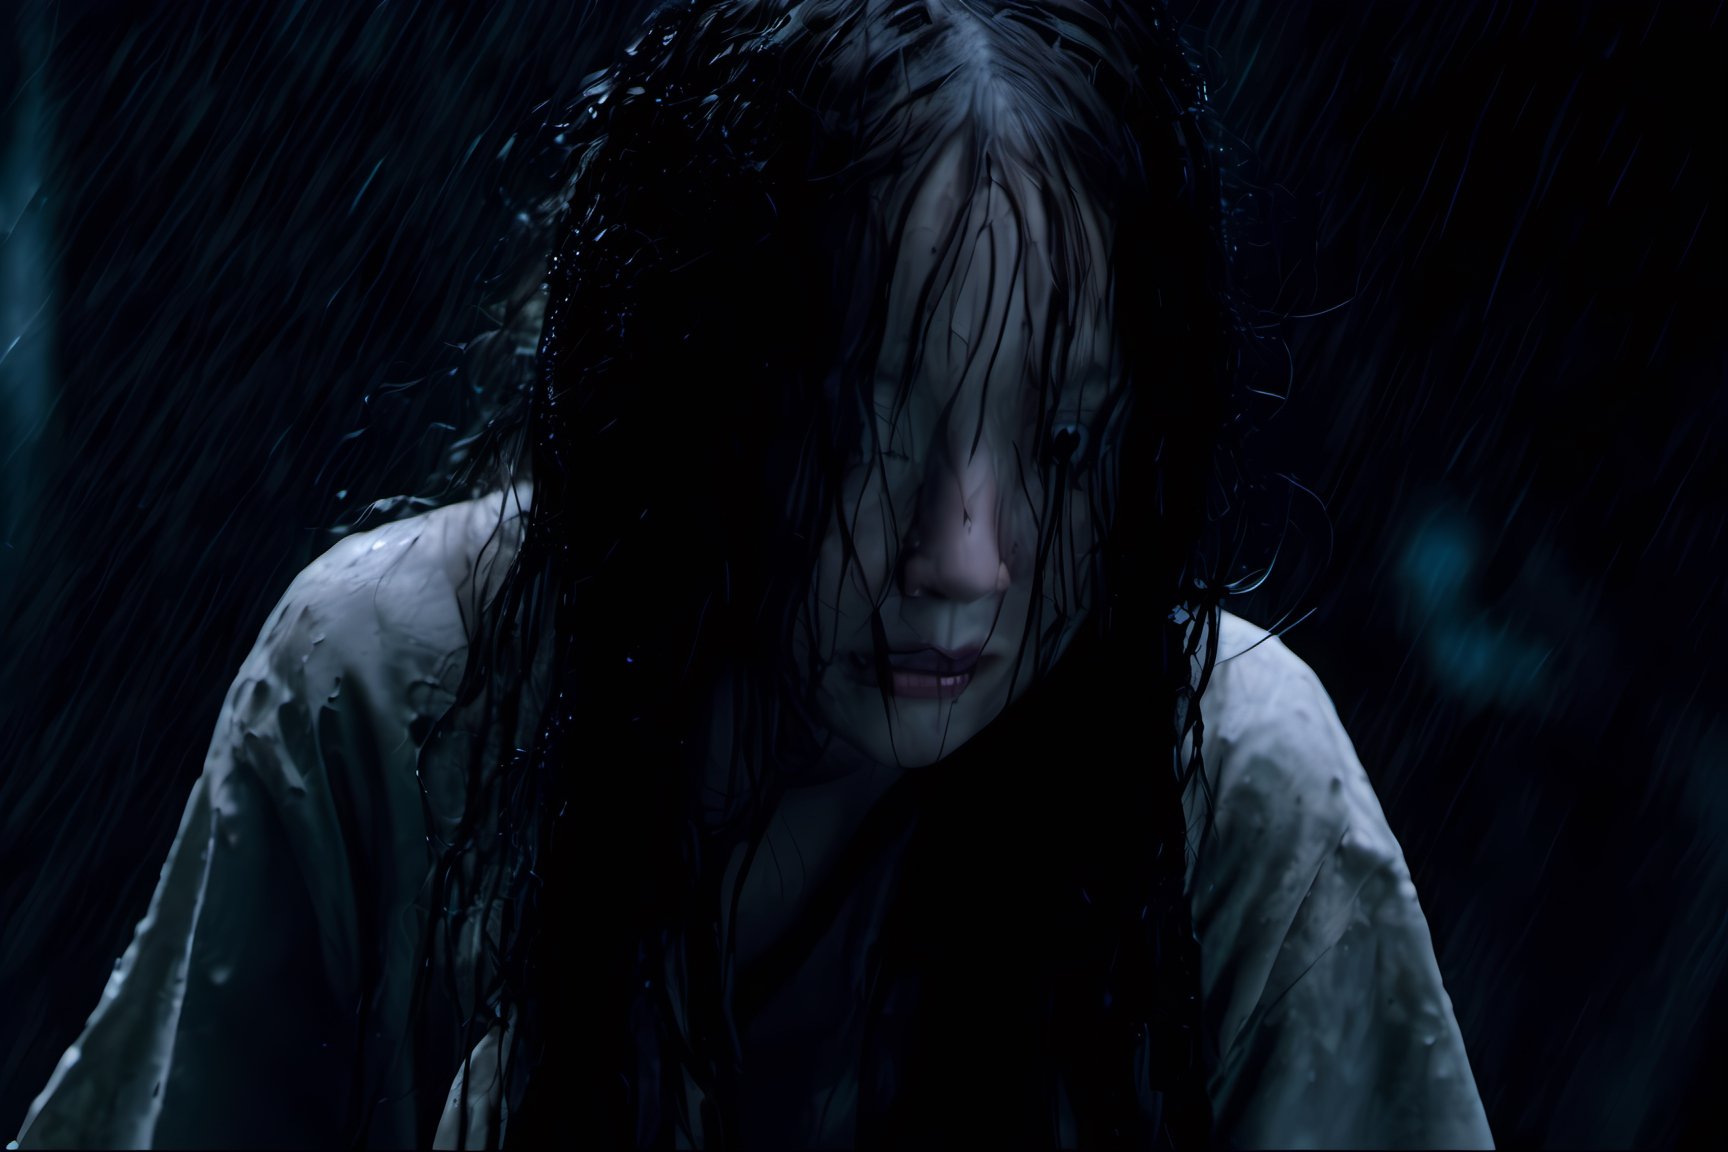 Onryo from the movie The Ring, wet messy hair, high quality, haunted house background, spooky, ghostly appearance, face down, looking down, lots of hair falling in front of face, very pale skin, crawling